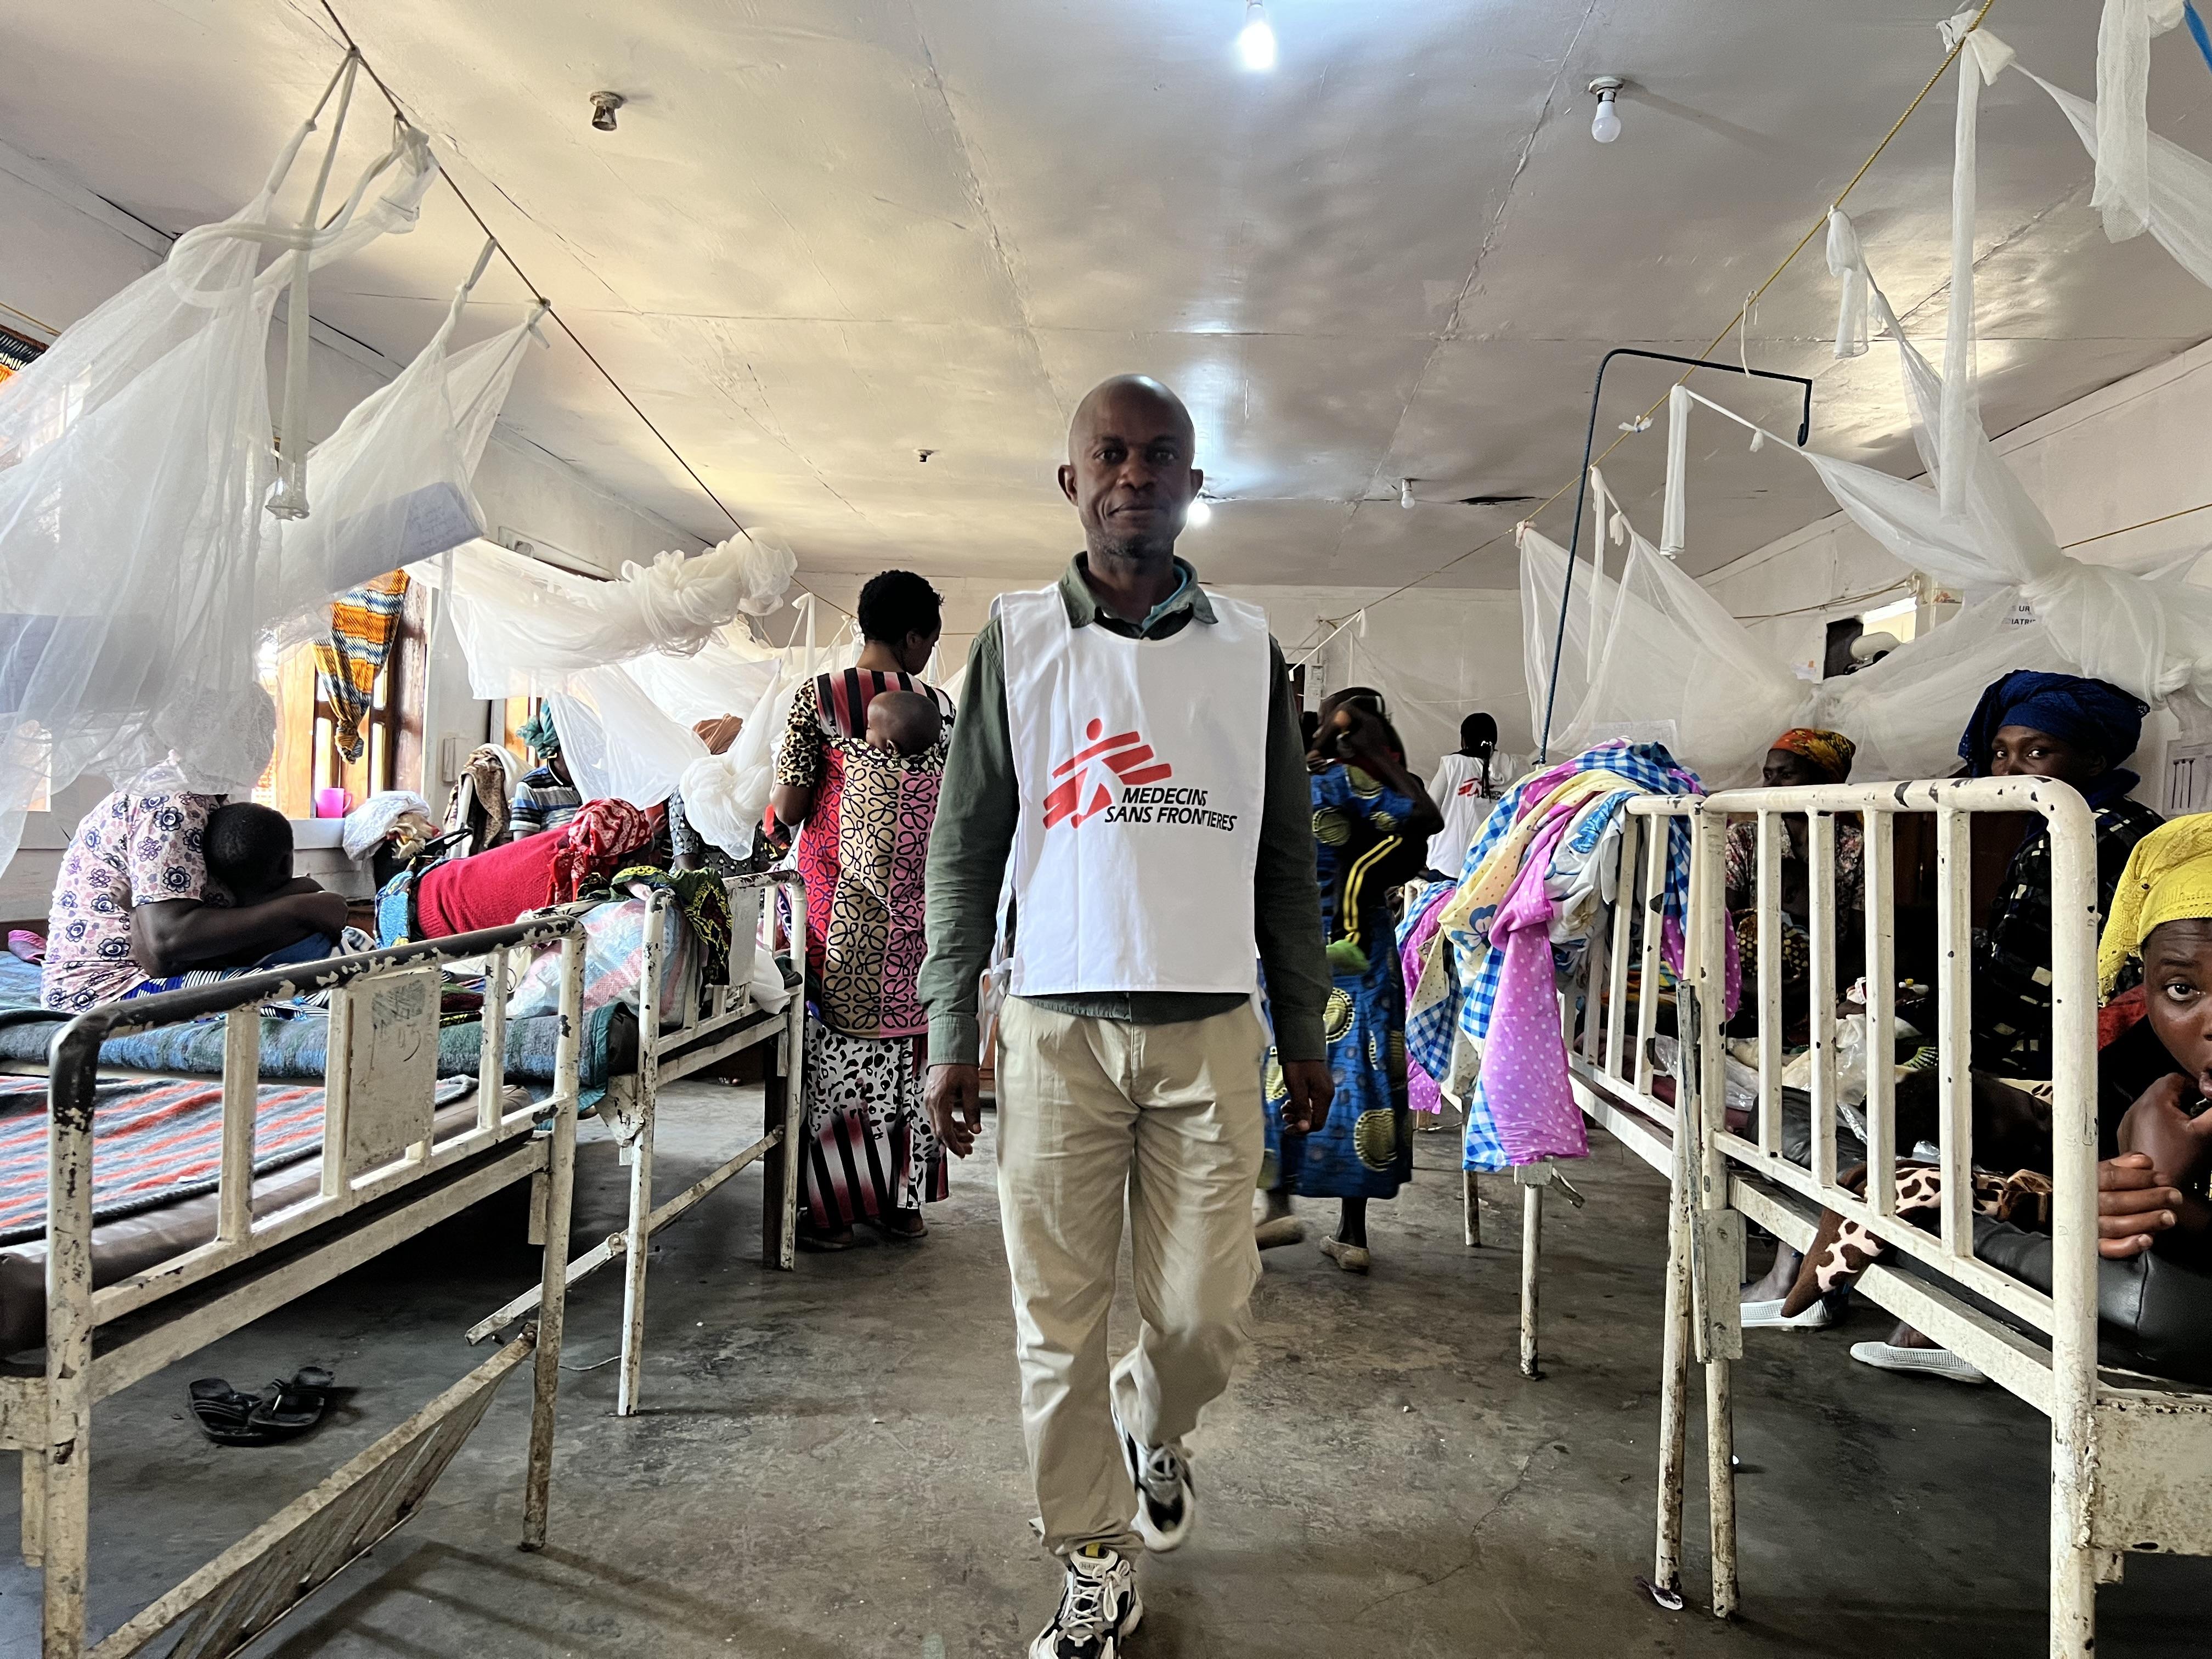 An MSF staff member walks through a ward full of patients at the Minova General Referral Hospital, in South Kivu province of eastern DRC.